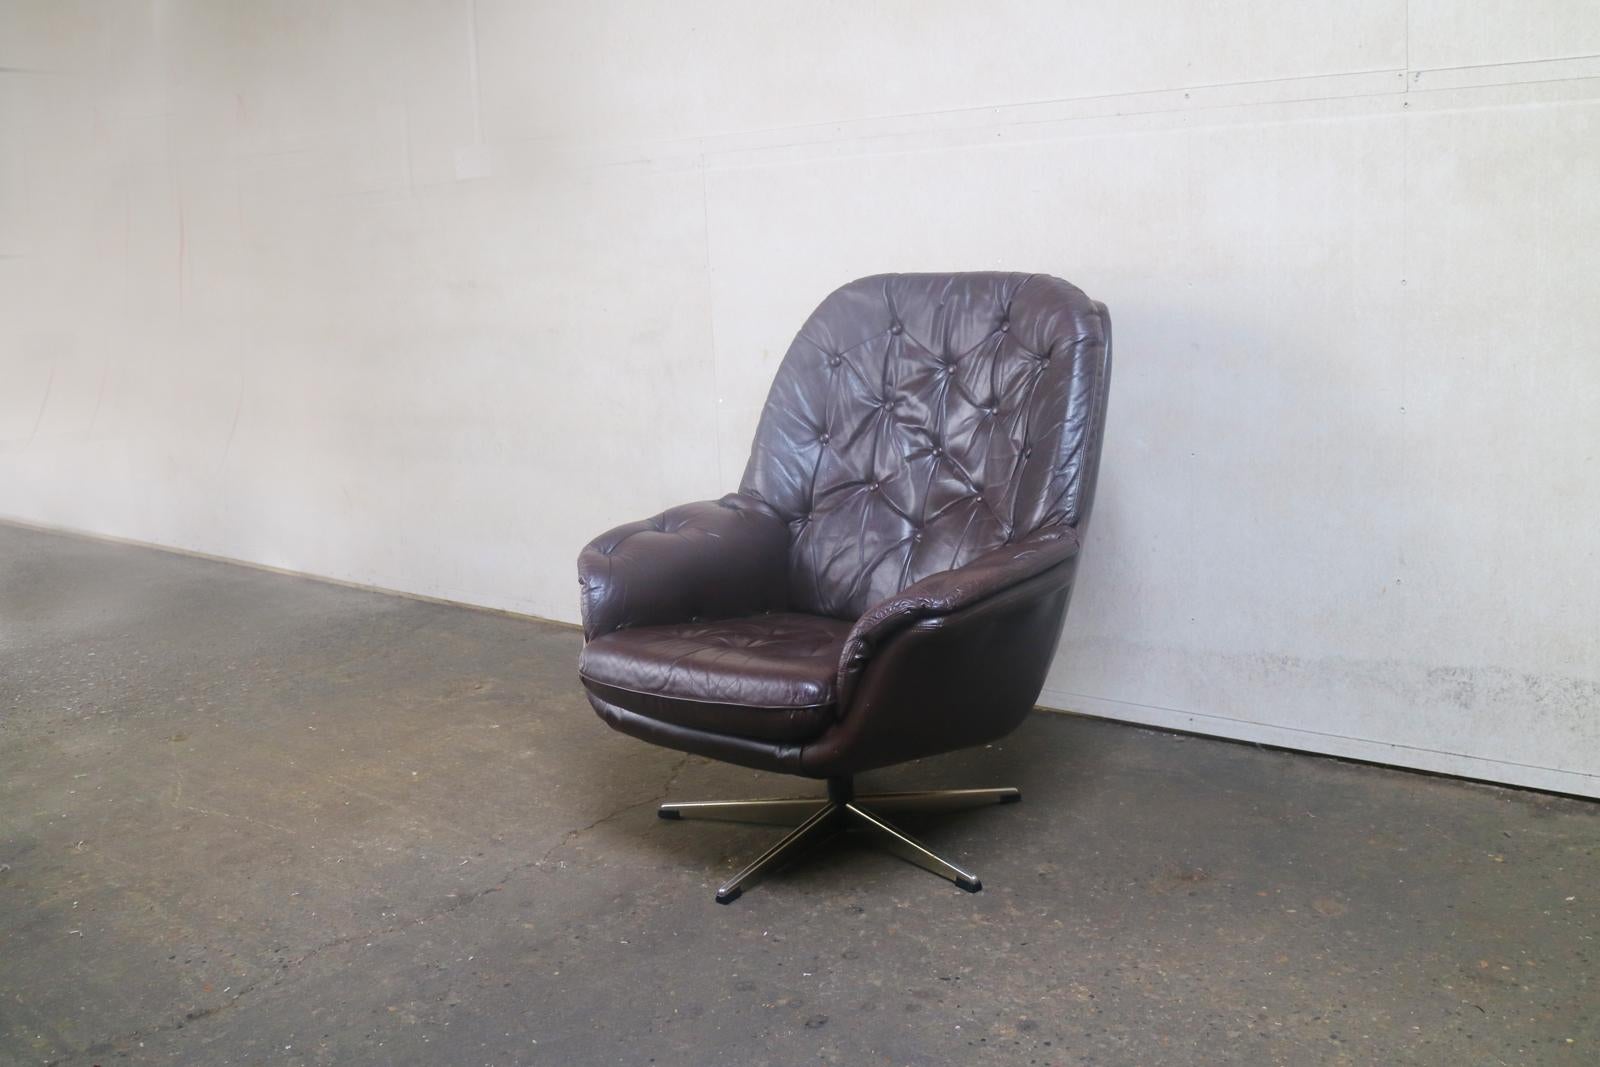 A Danish Mid-Century Modern swivel armchair, with button detailing on seat and backrest, upholstered in the original very dark brown leather.